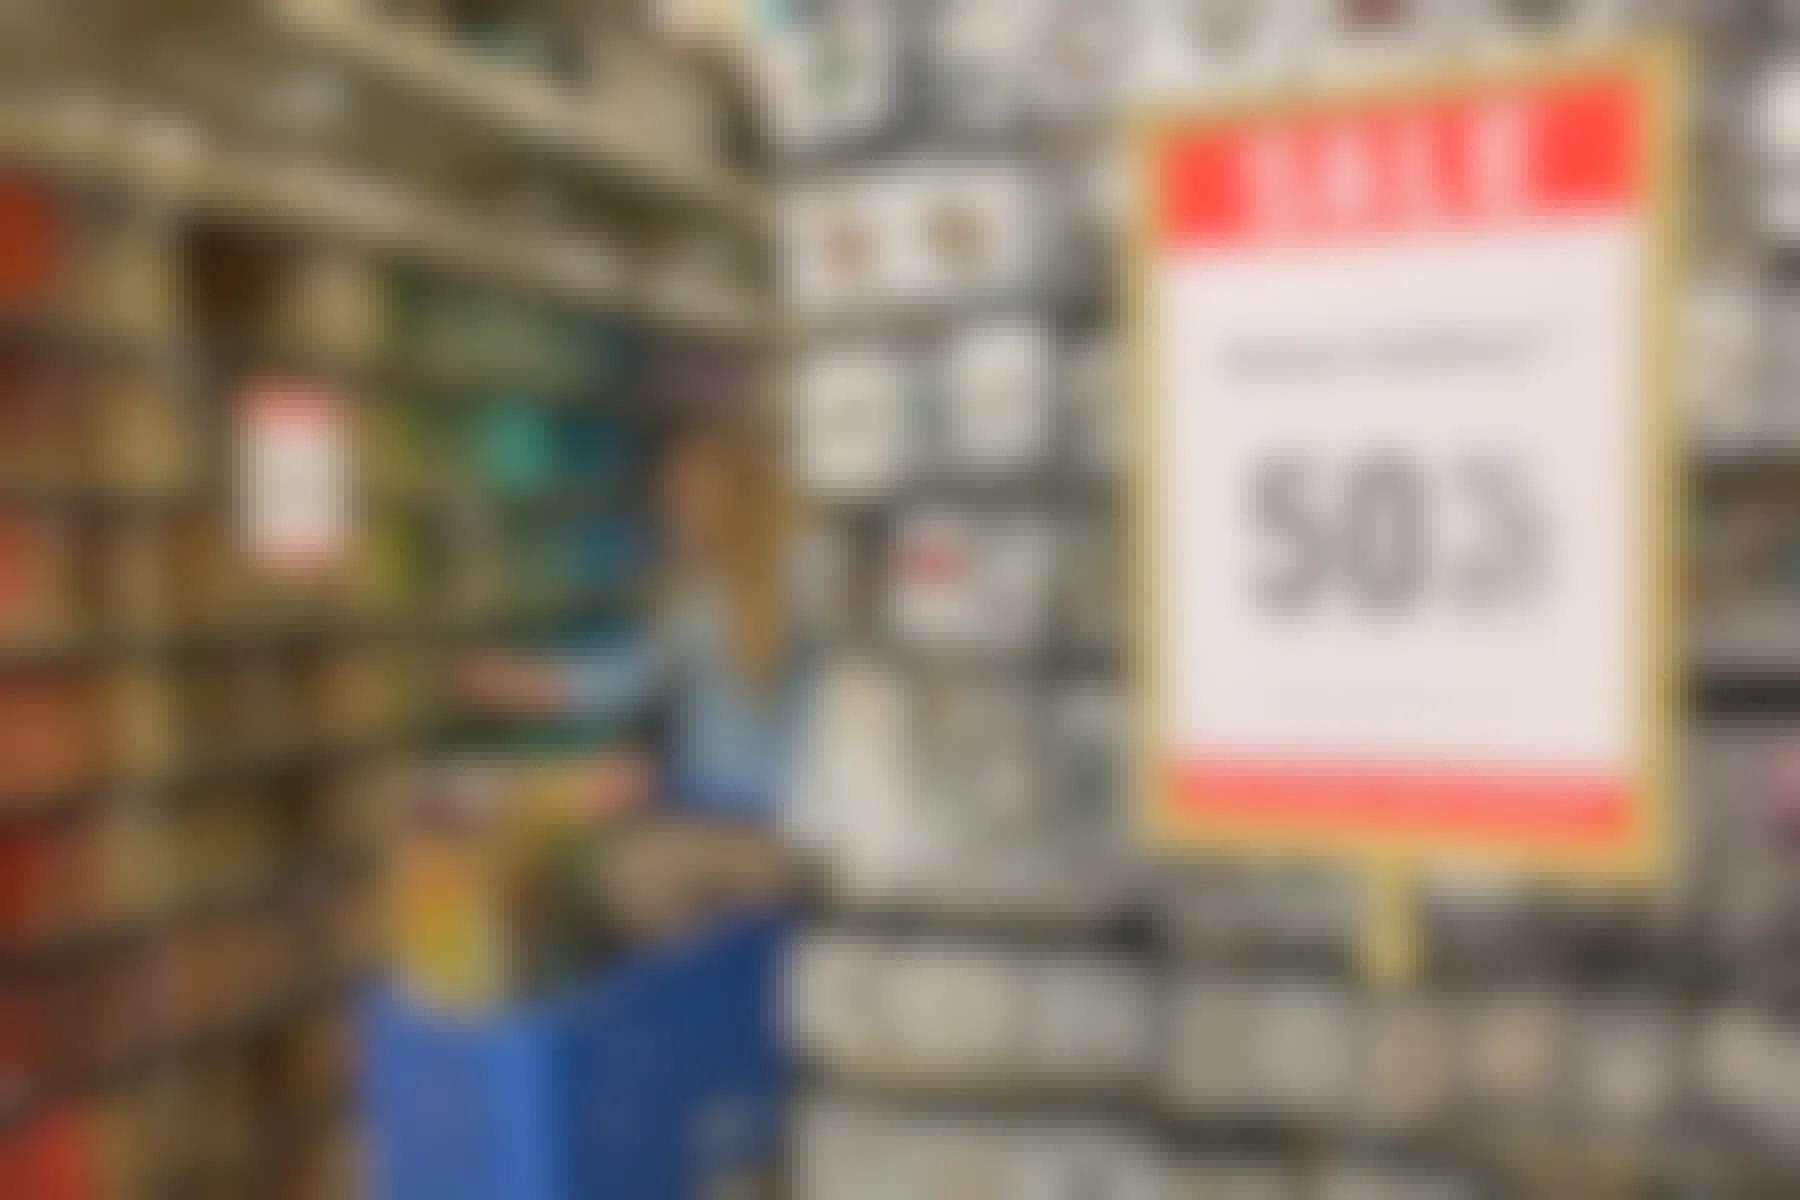 A sale sign on an end cap that reads "50% off". A woman can be seen in the background shopping for beads.